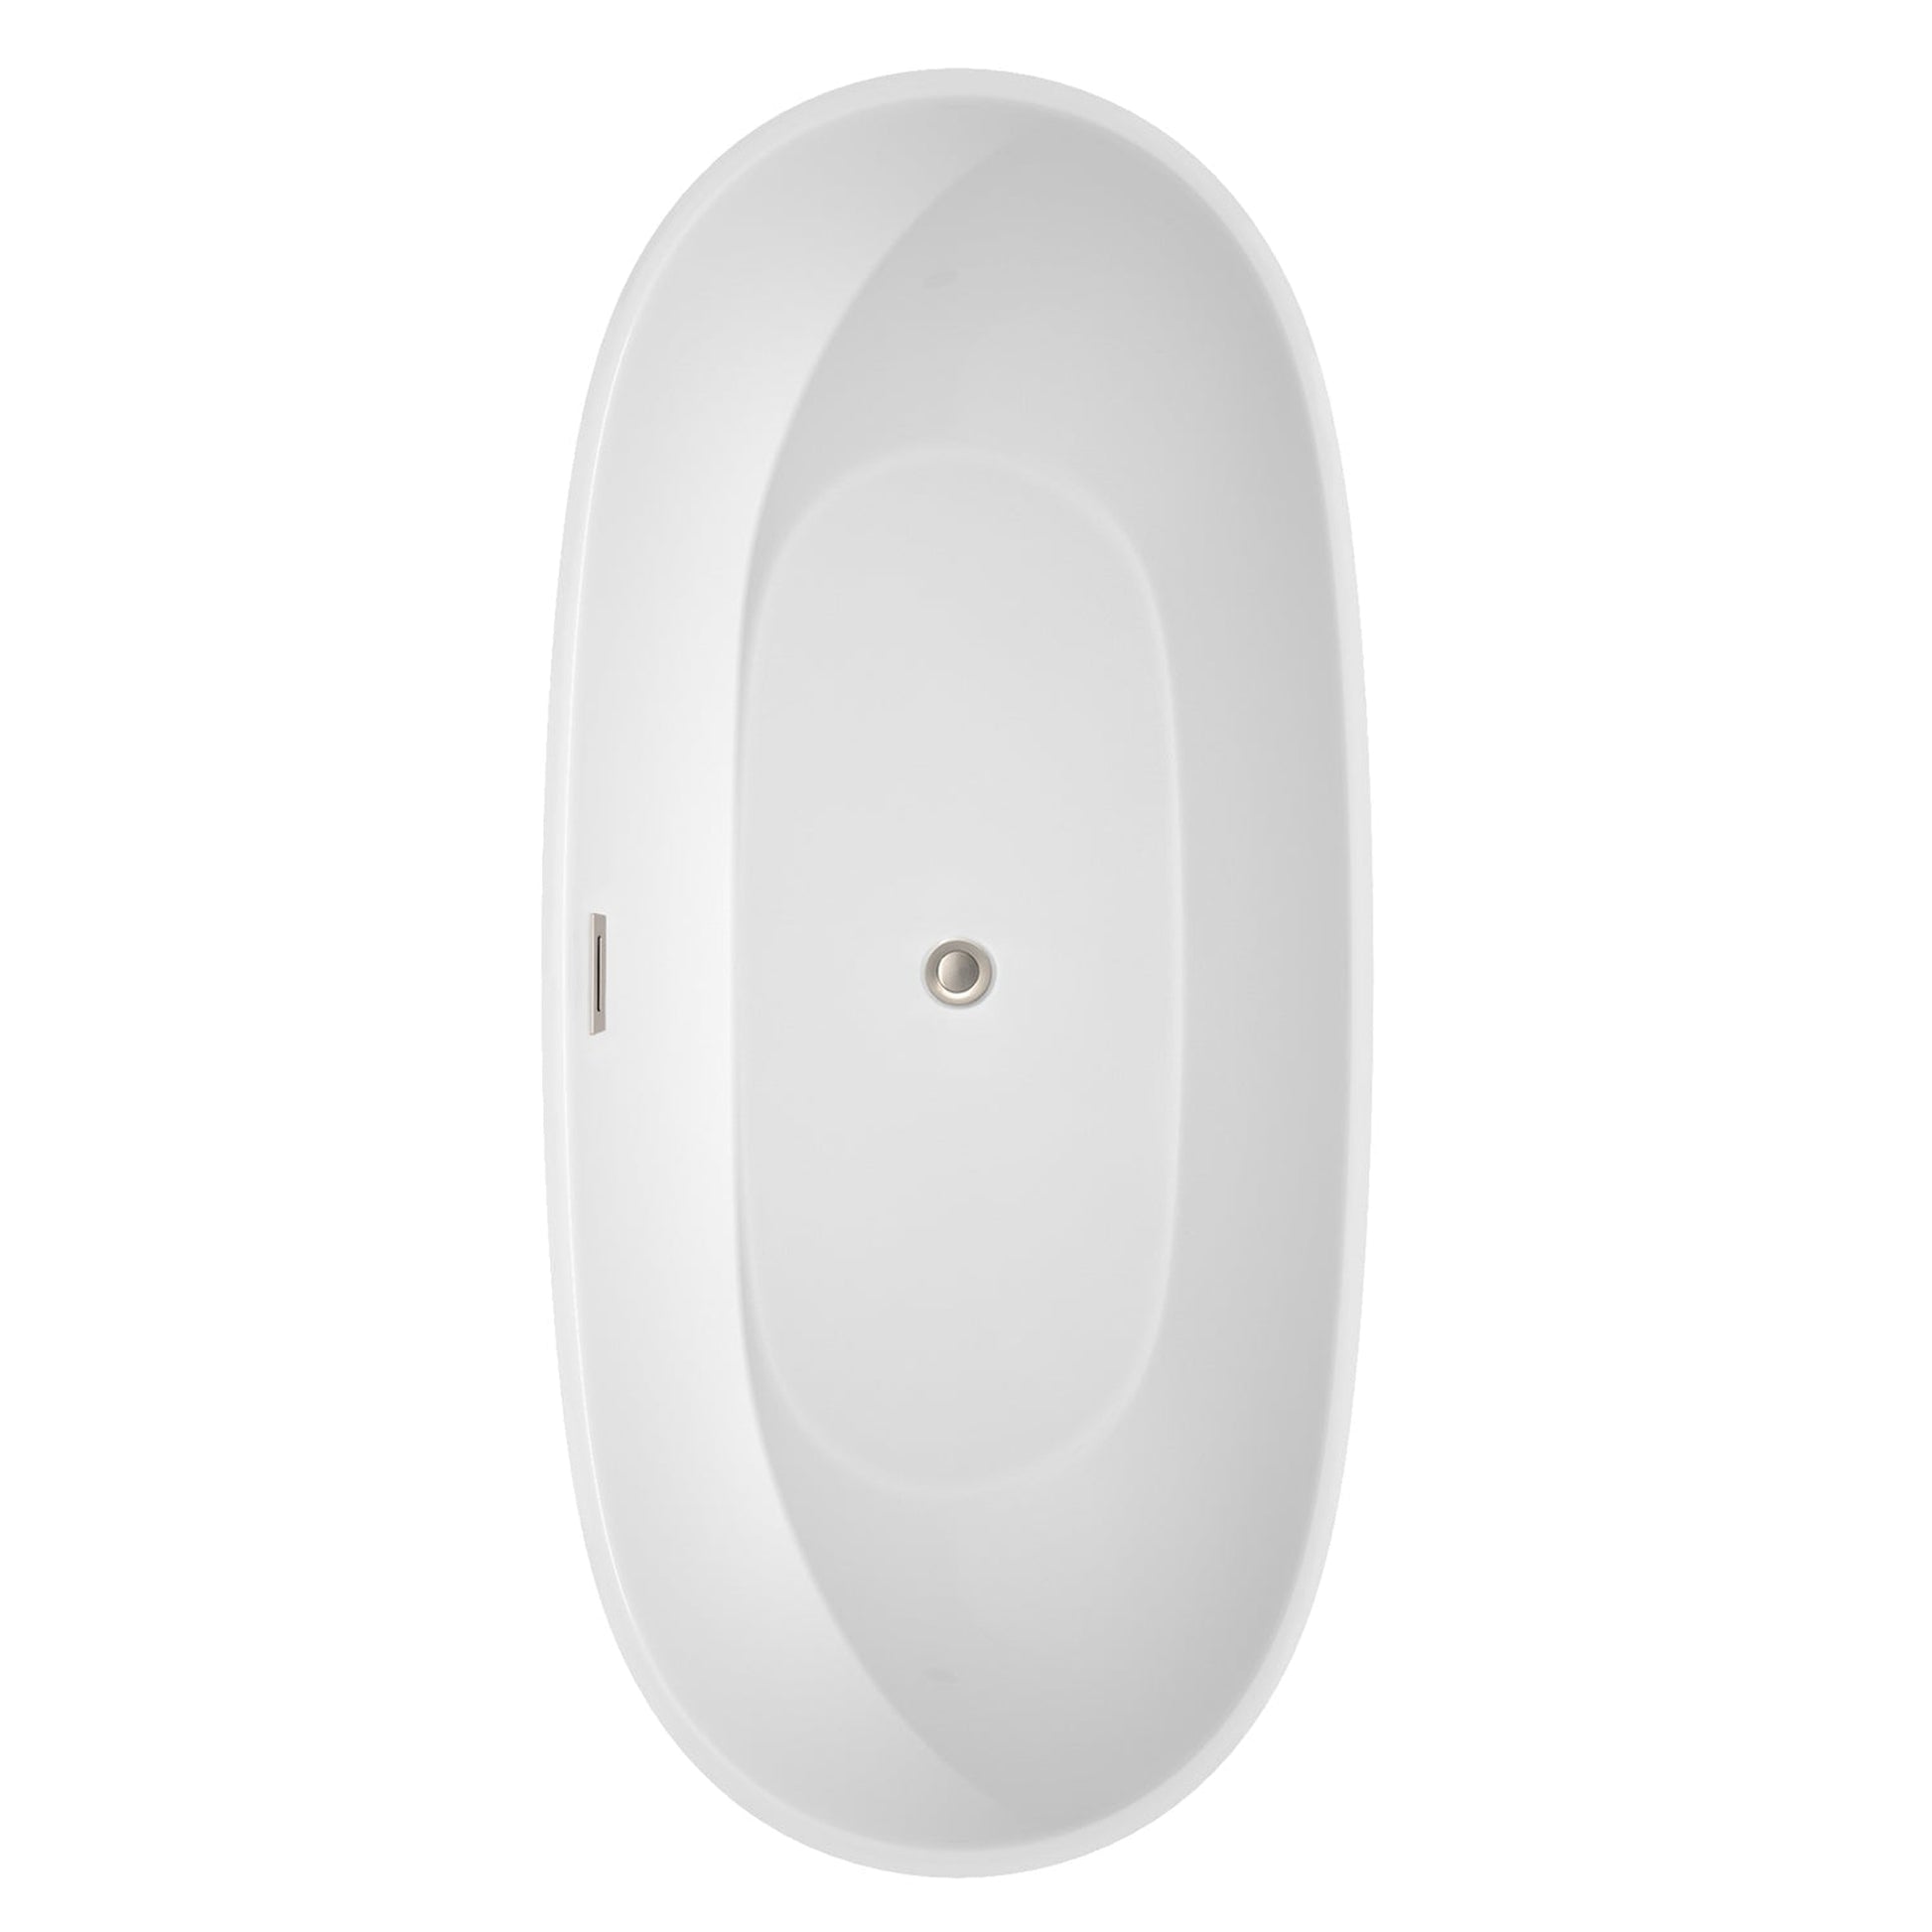 Wyndham Collection Juno 71" Freestanding Bathtub in White With Brushed Nickel Drain and Overflow Trim